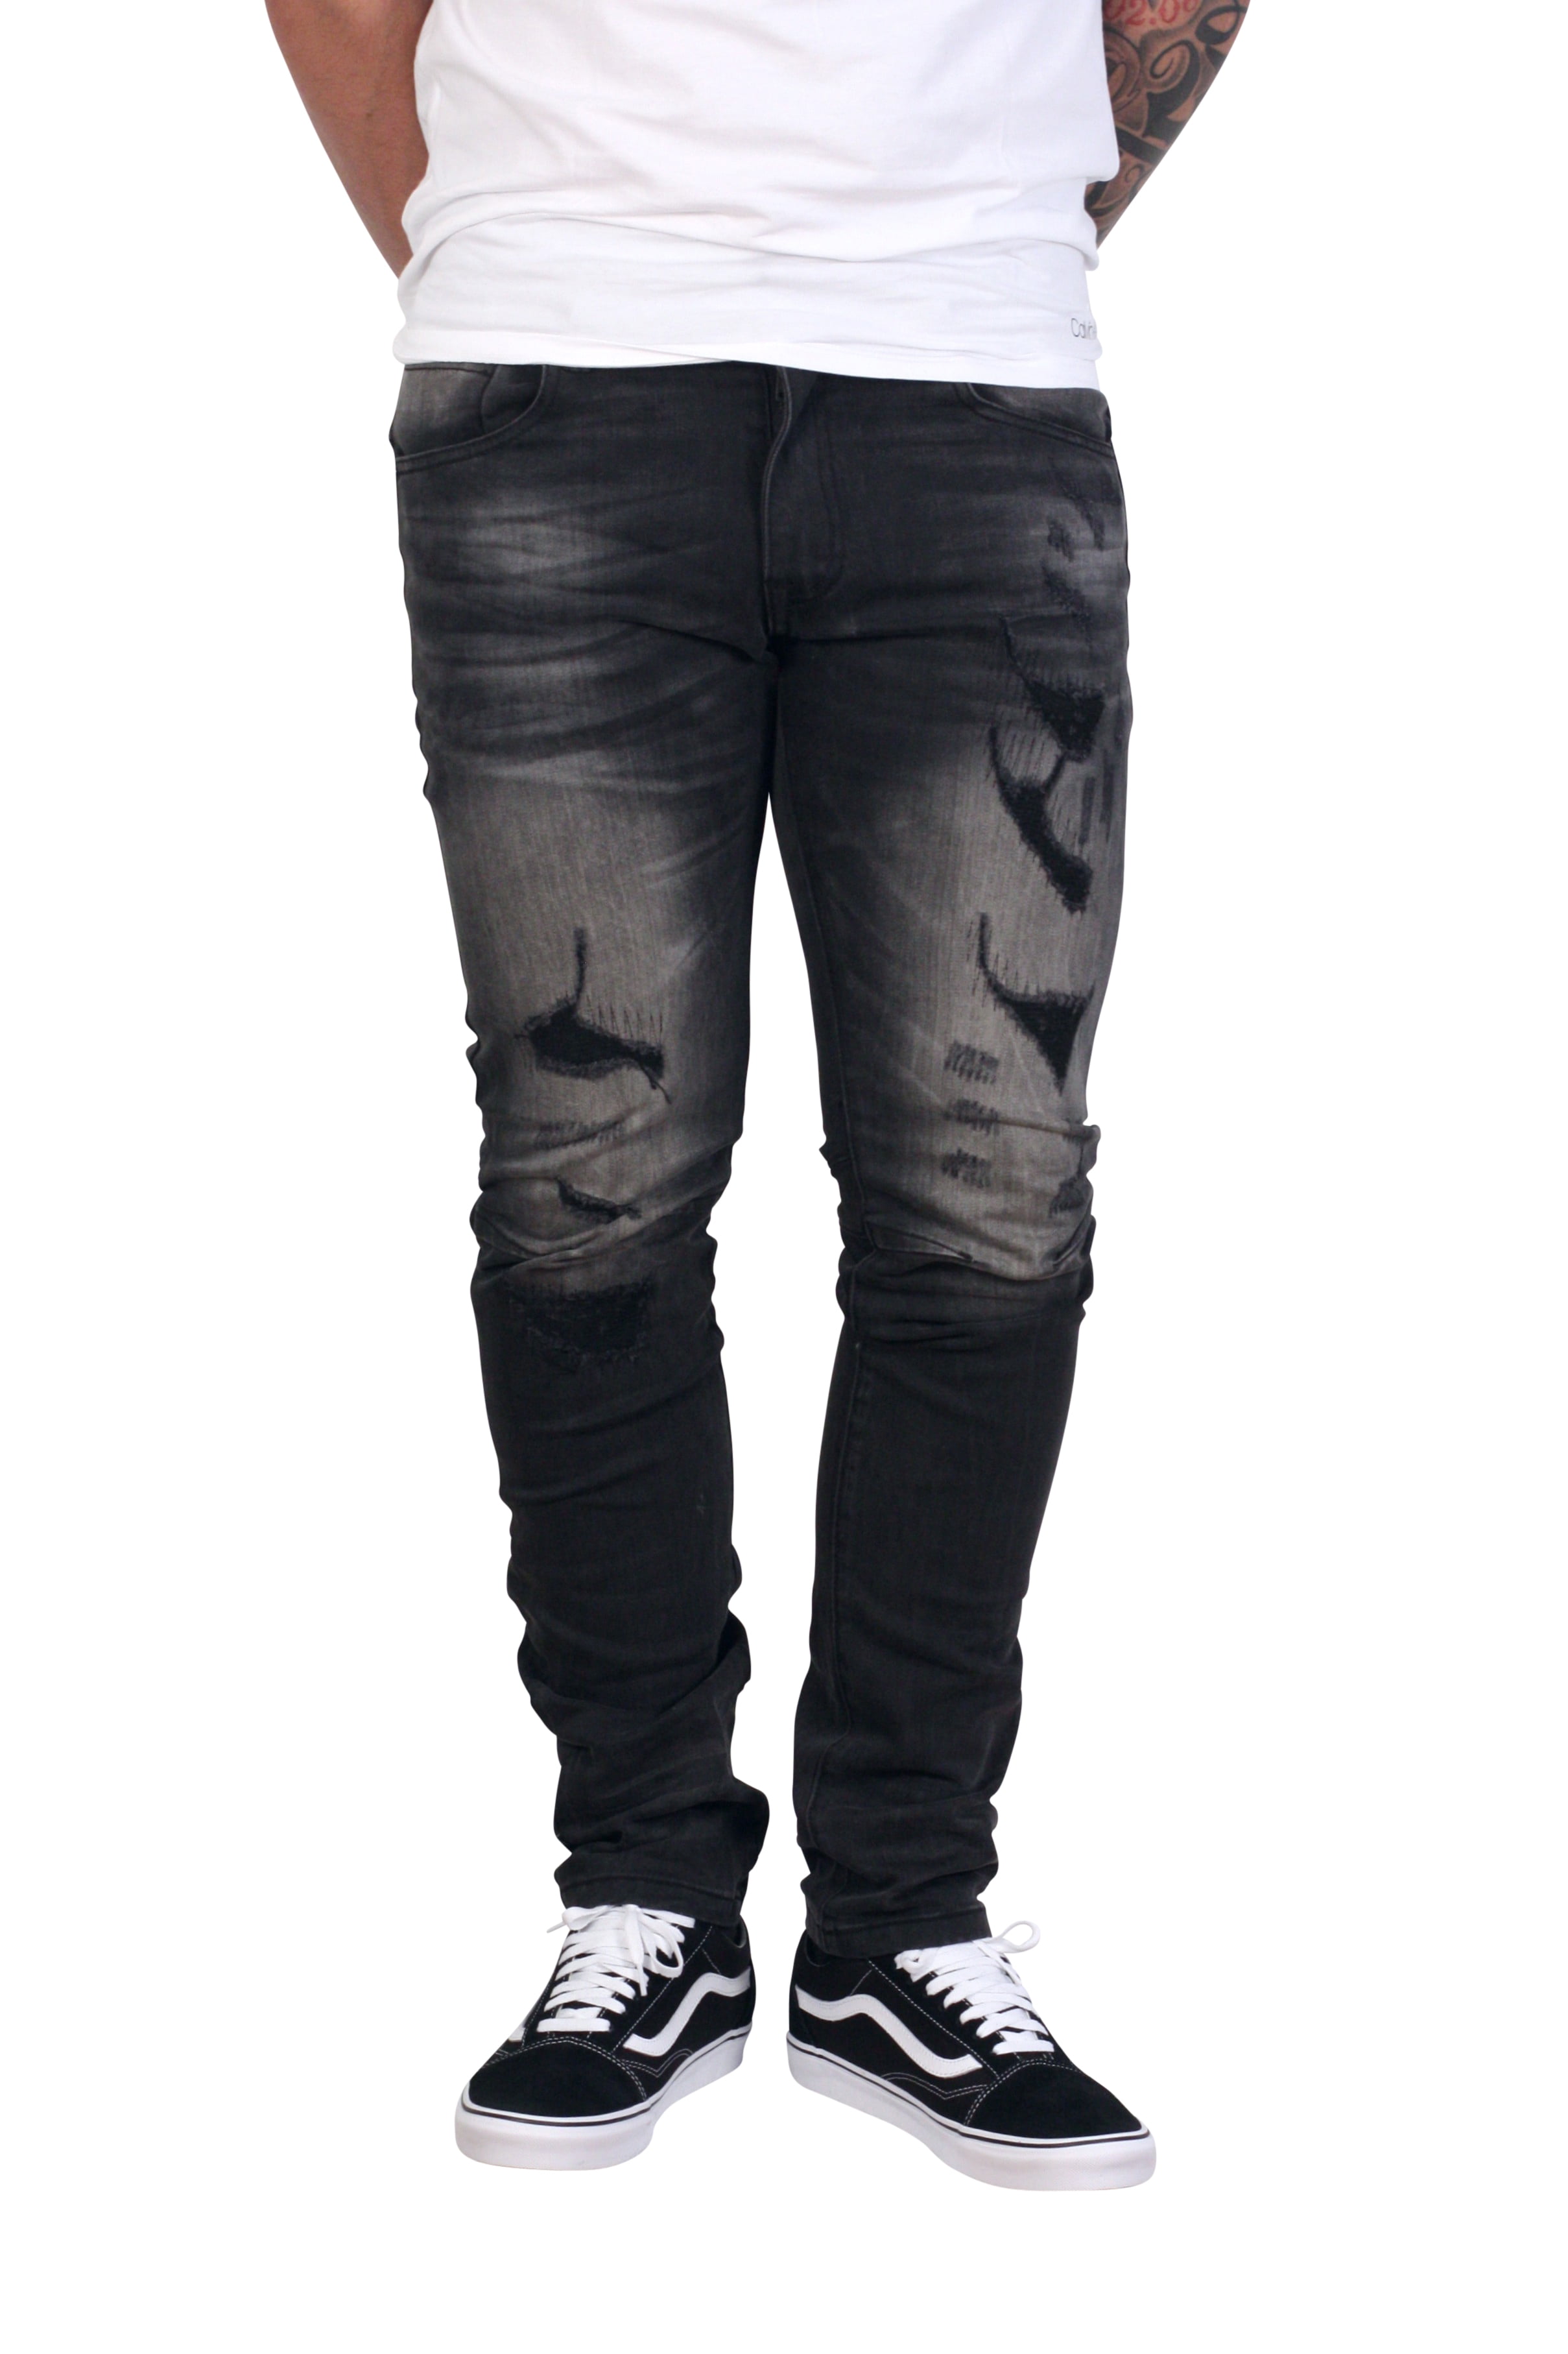 black jeans with lots of rips